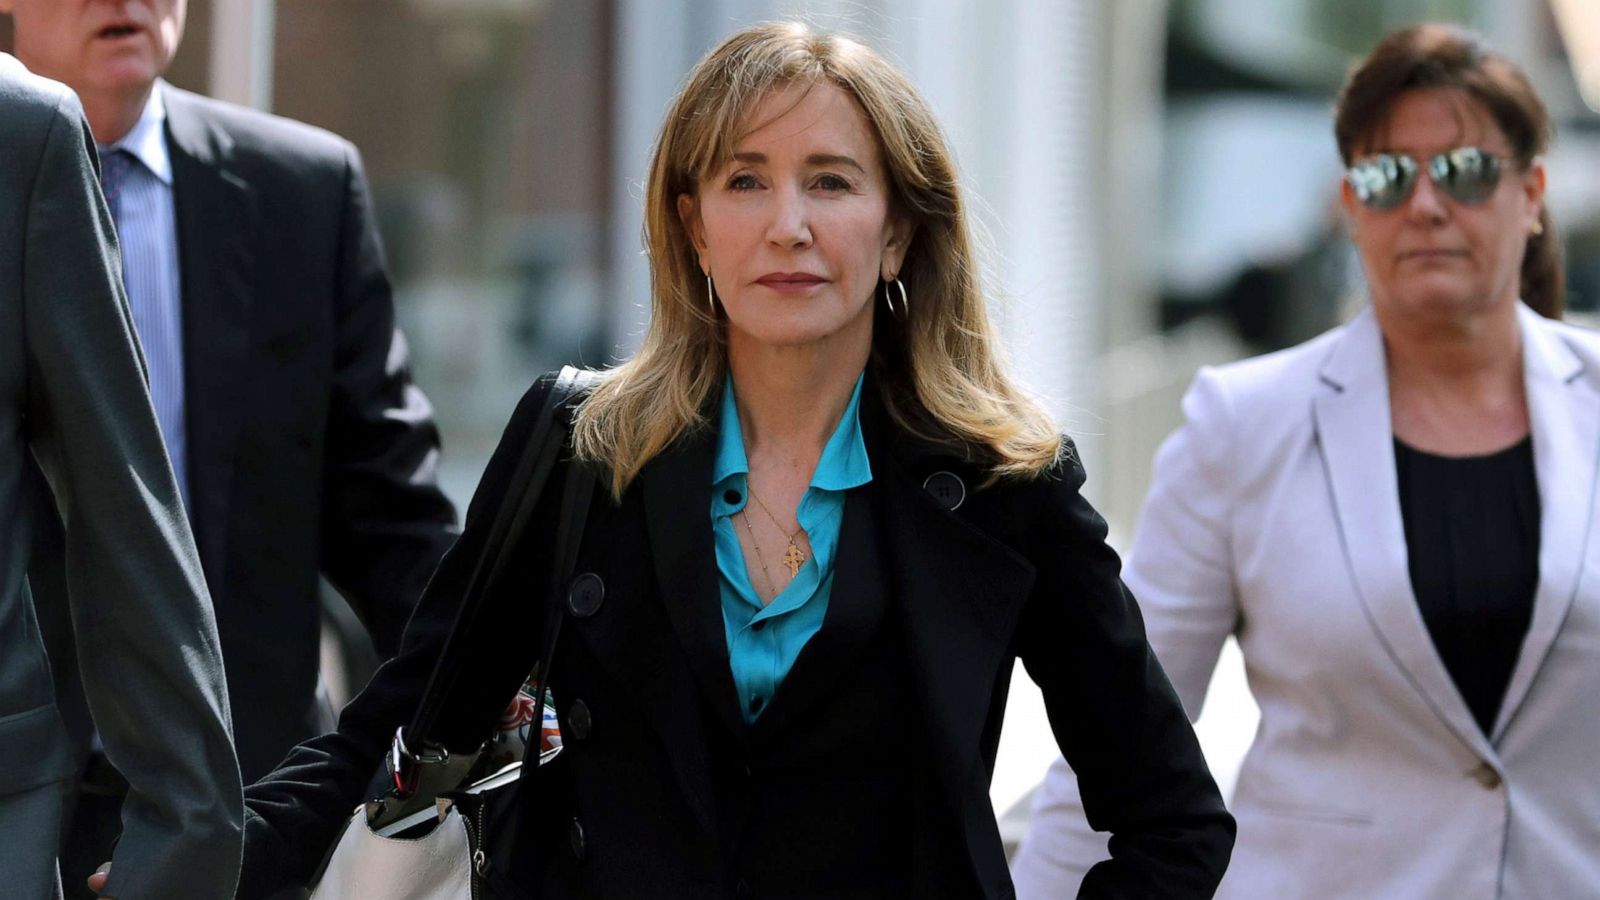 Actress Felicity Huffman among 14 to plead guilty in college admissions cheating scandal